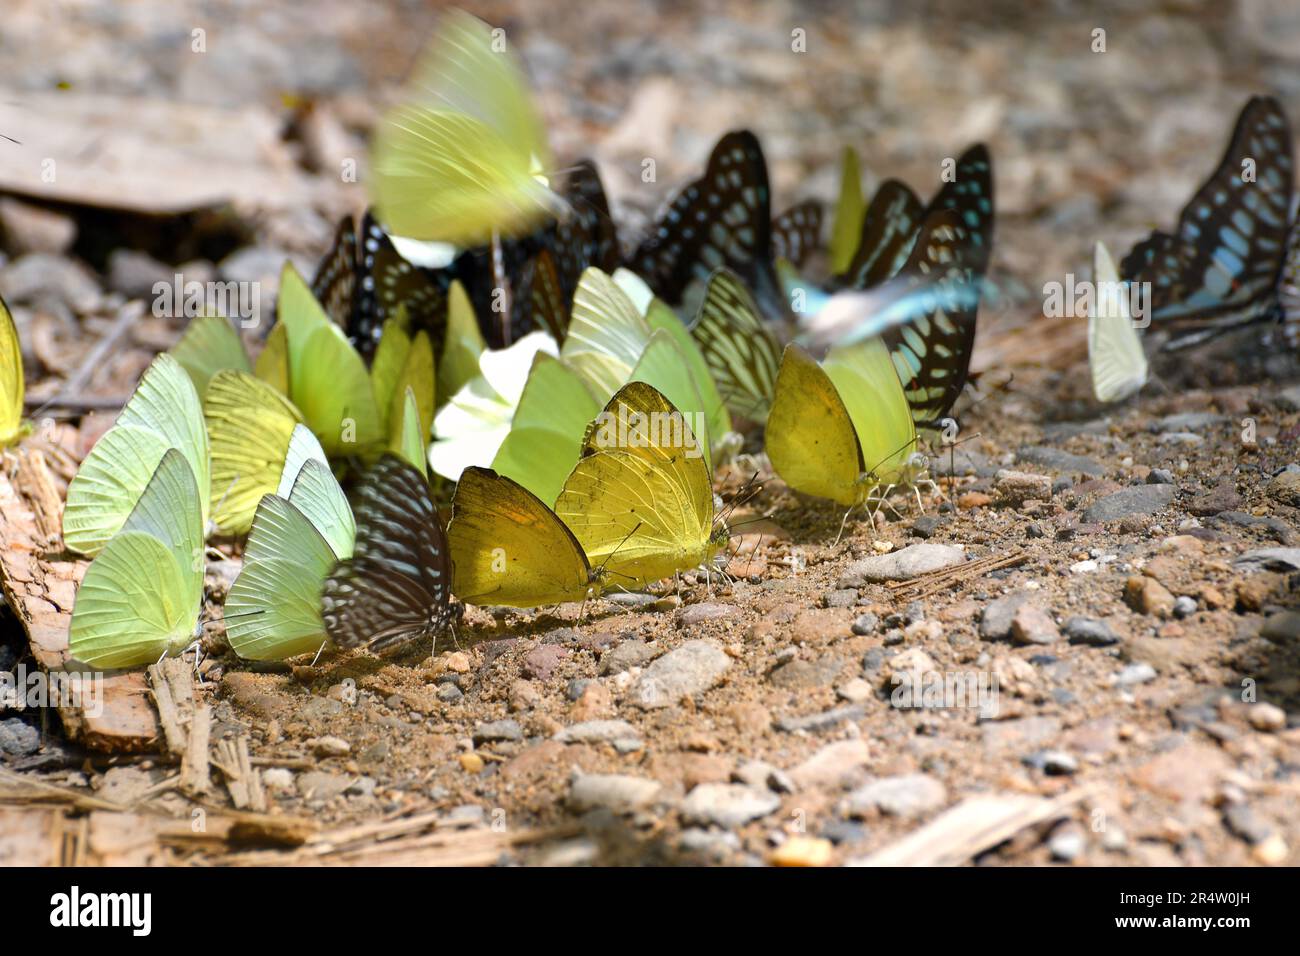 Butterfly at Kaeng Krachan National Park, Thailand. There are around 300 butterfly species are found in the park during March to June every year. Stock Photo